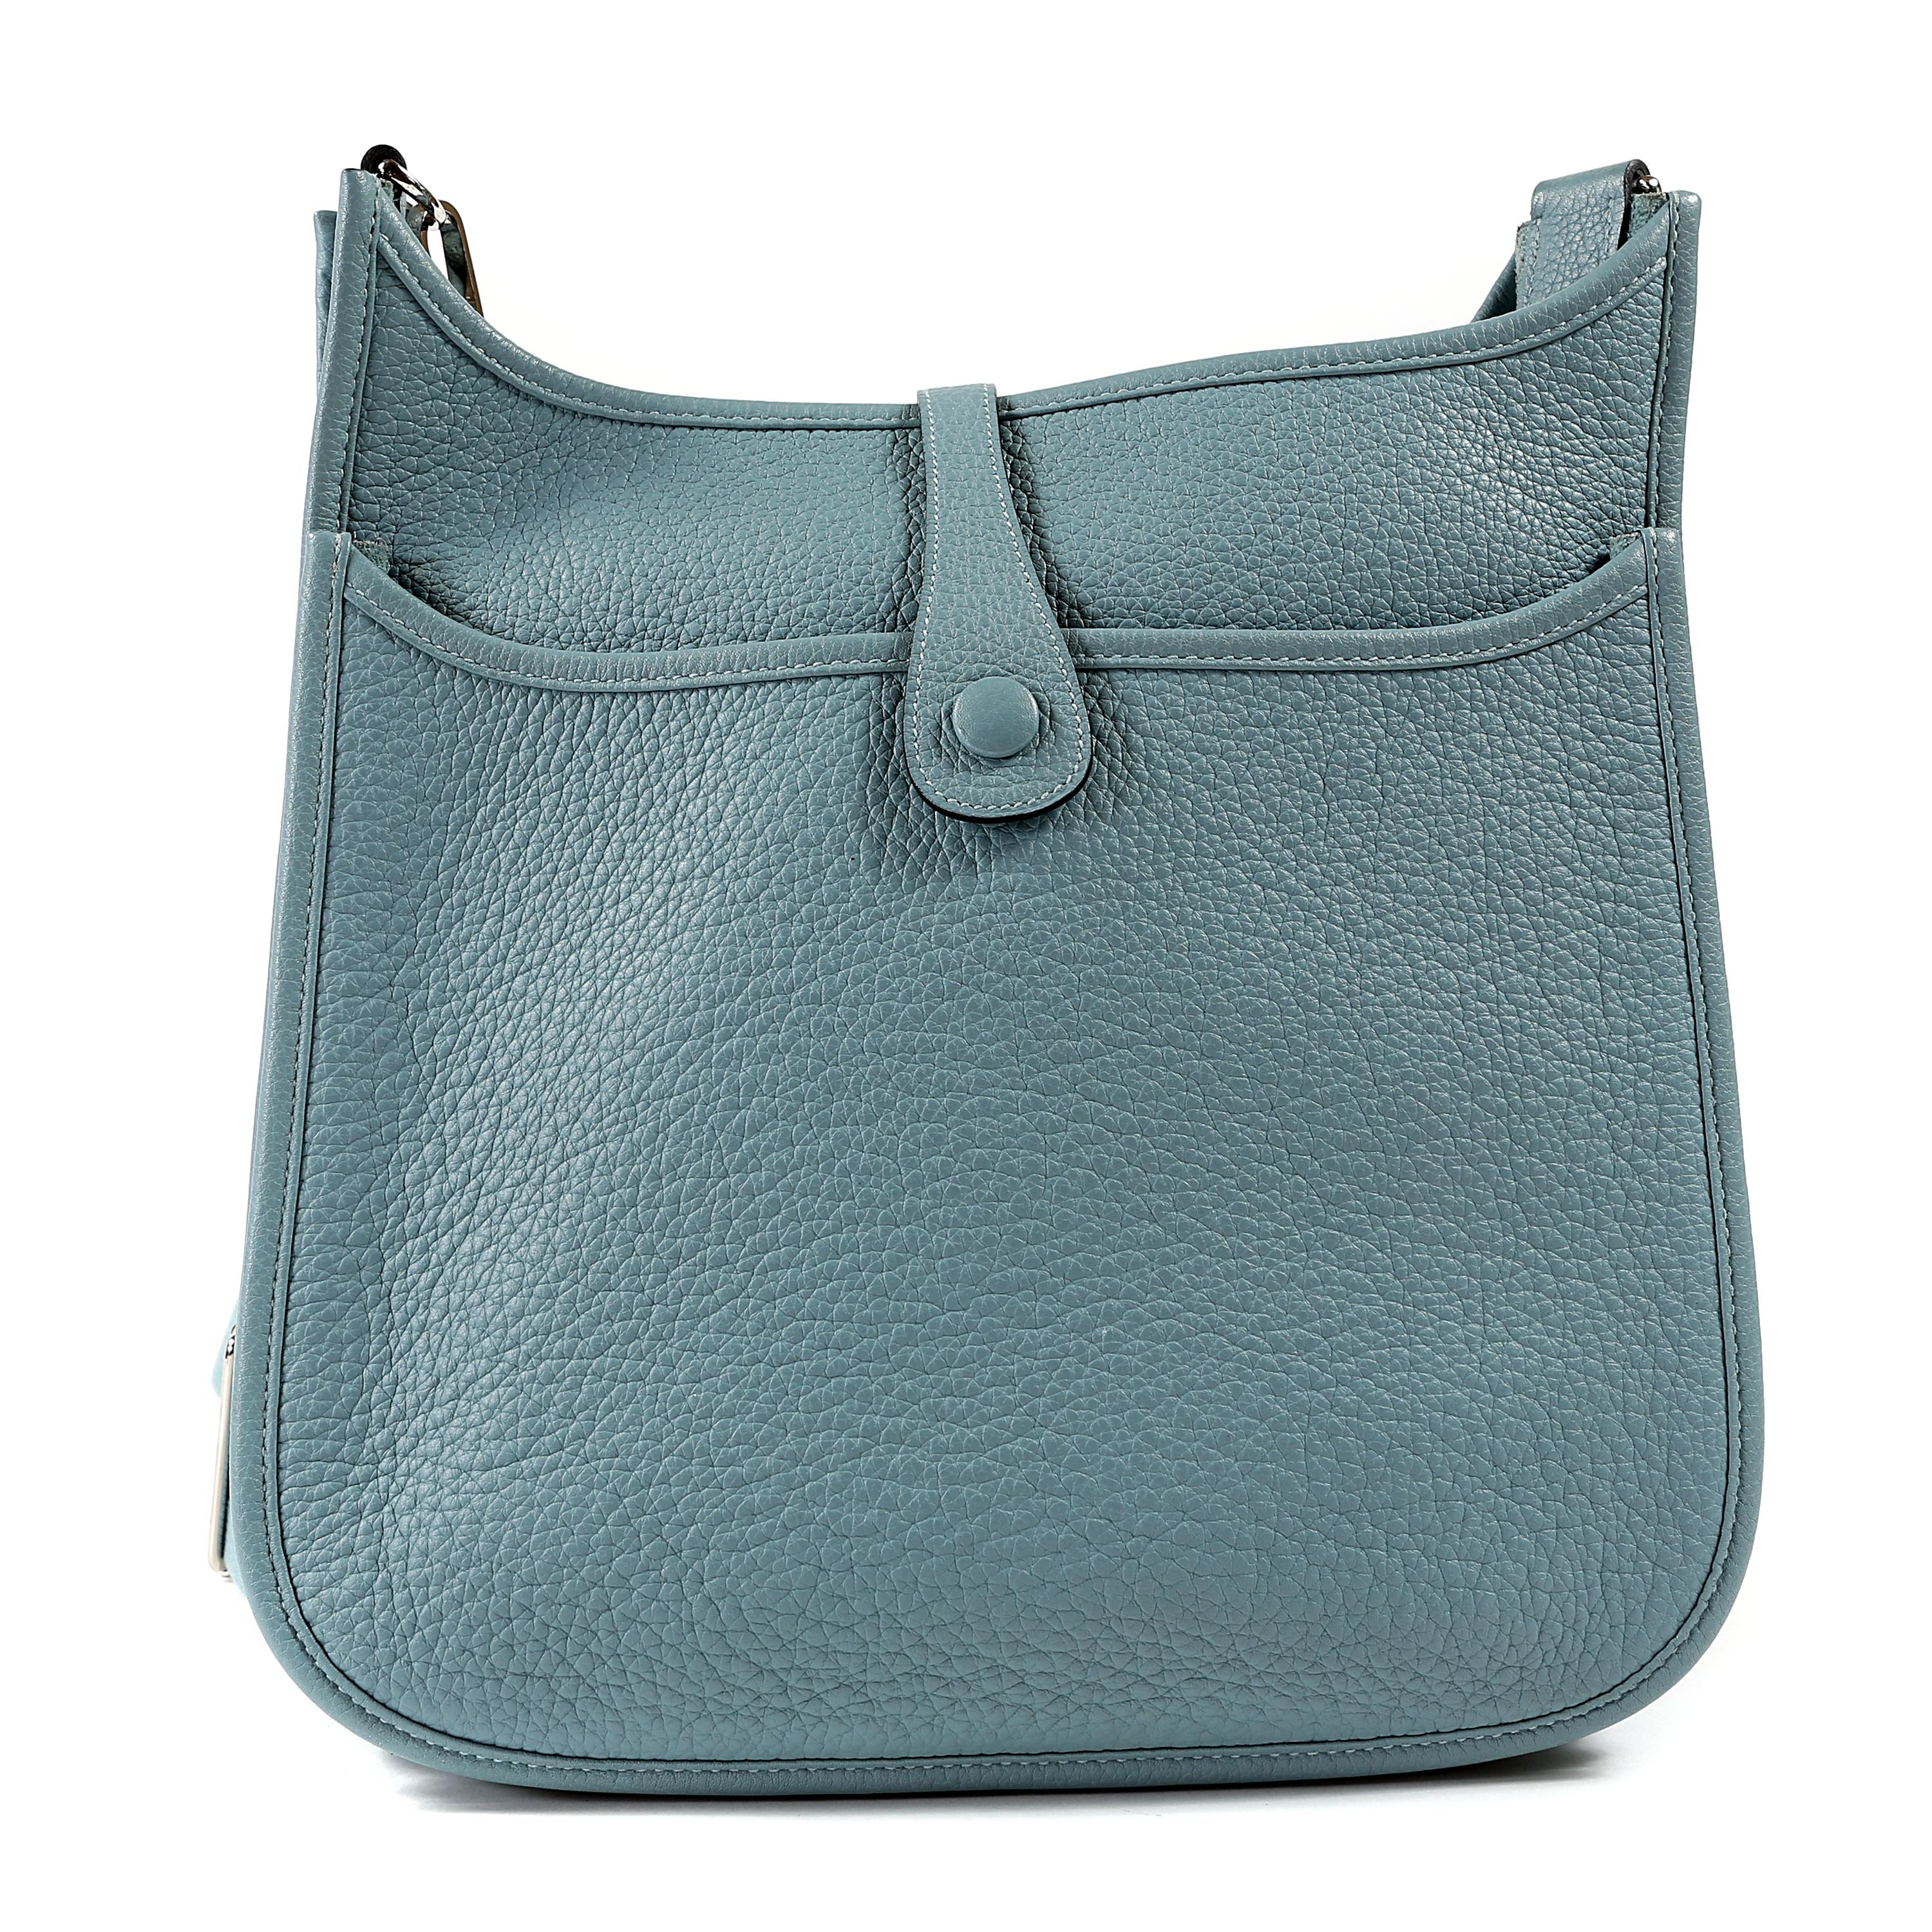 This authentic Hermès Light Blue Clemence Medium Evelyne PM III is in pristine condition. Extremely sought after, the Evelyne is an understated day bag that is stylish and practical.  The third generation sports a rear pocket and adjustable canvas